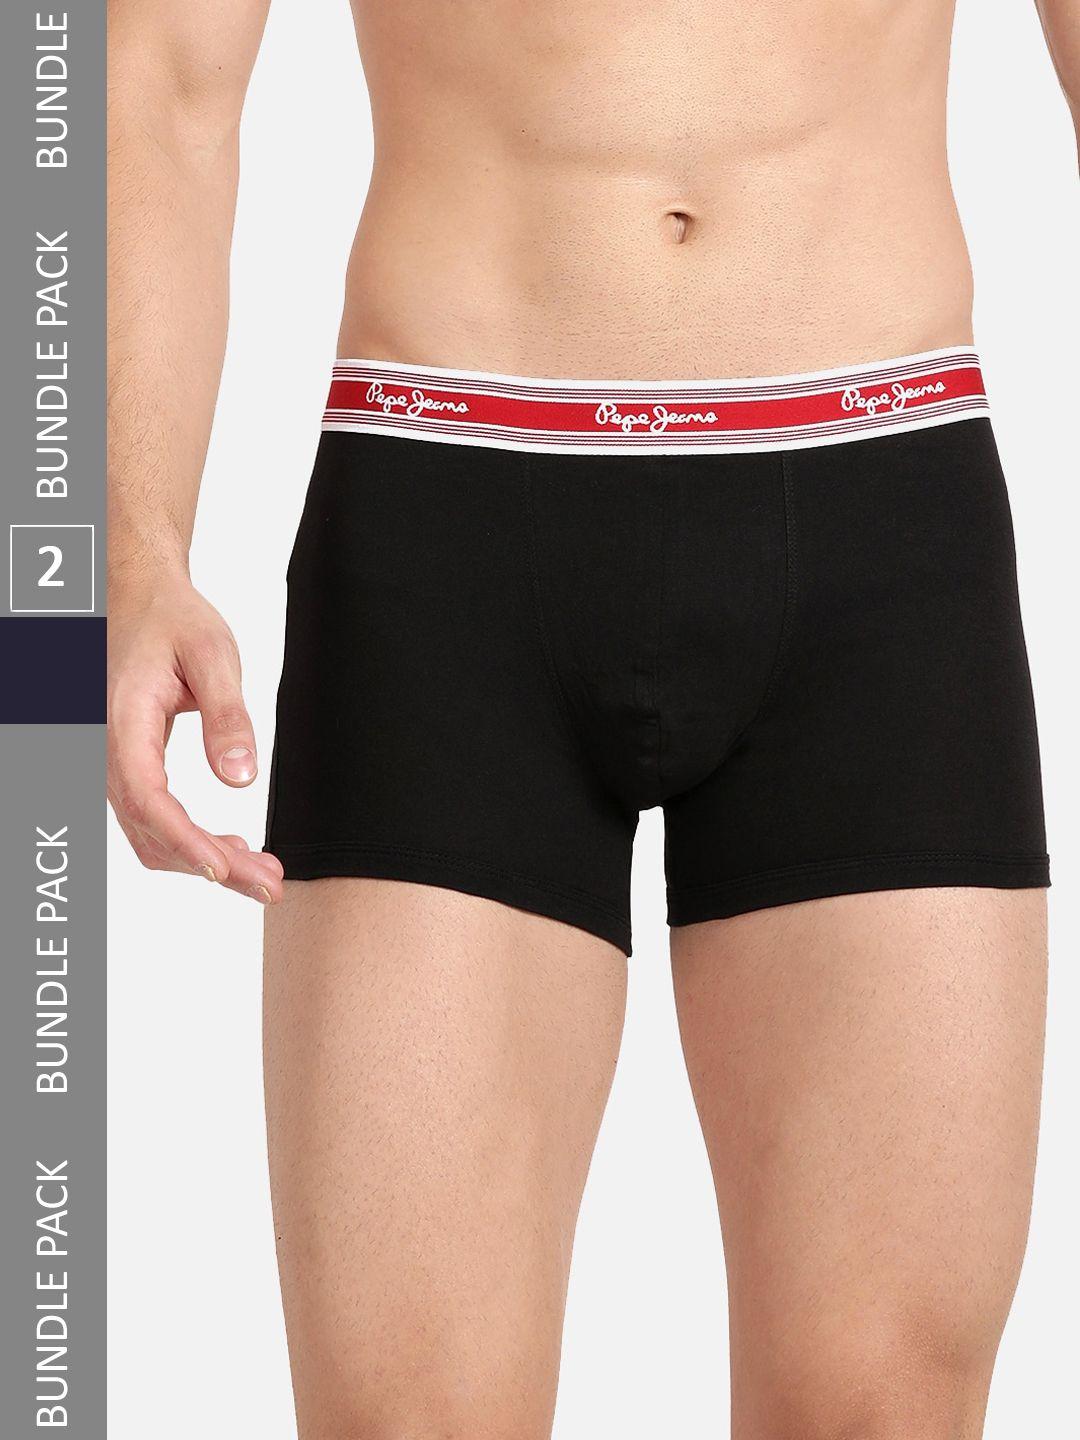 pepe jeans men pack of 2 mid-rise cotton trunks